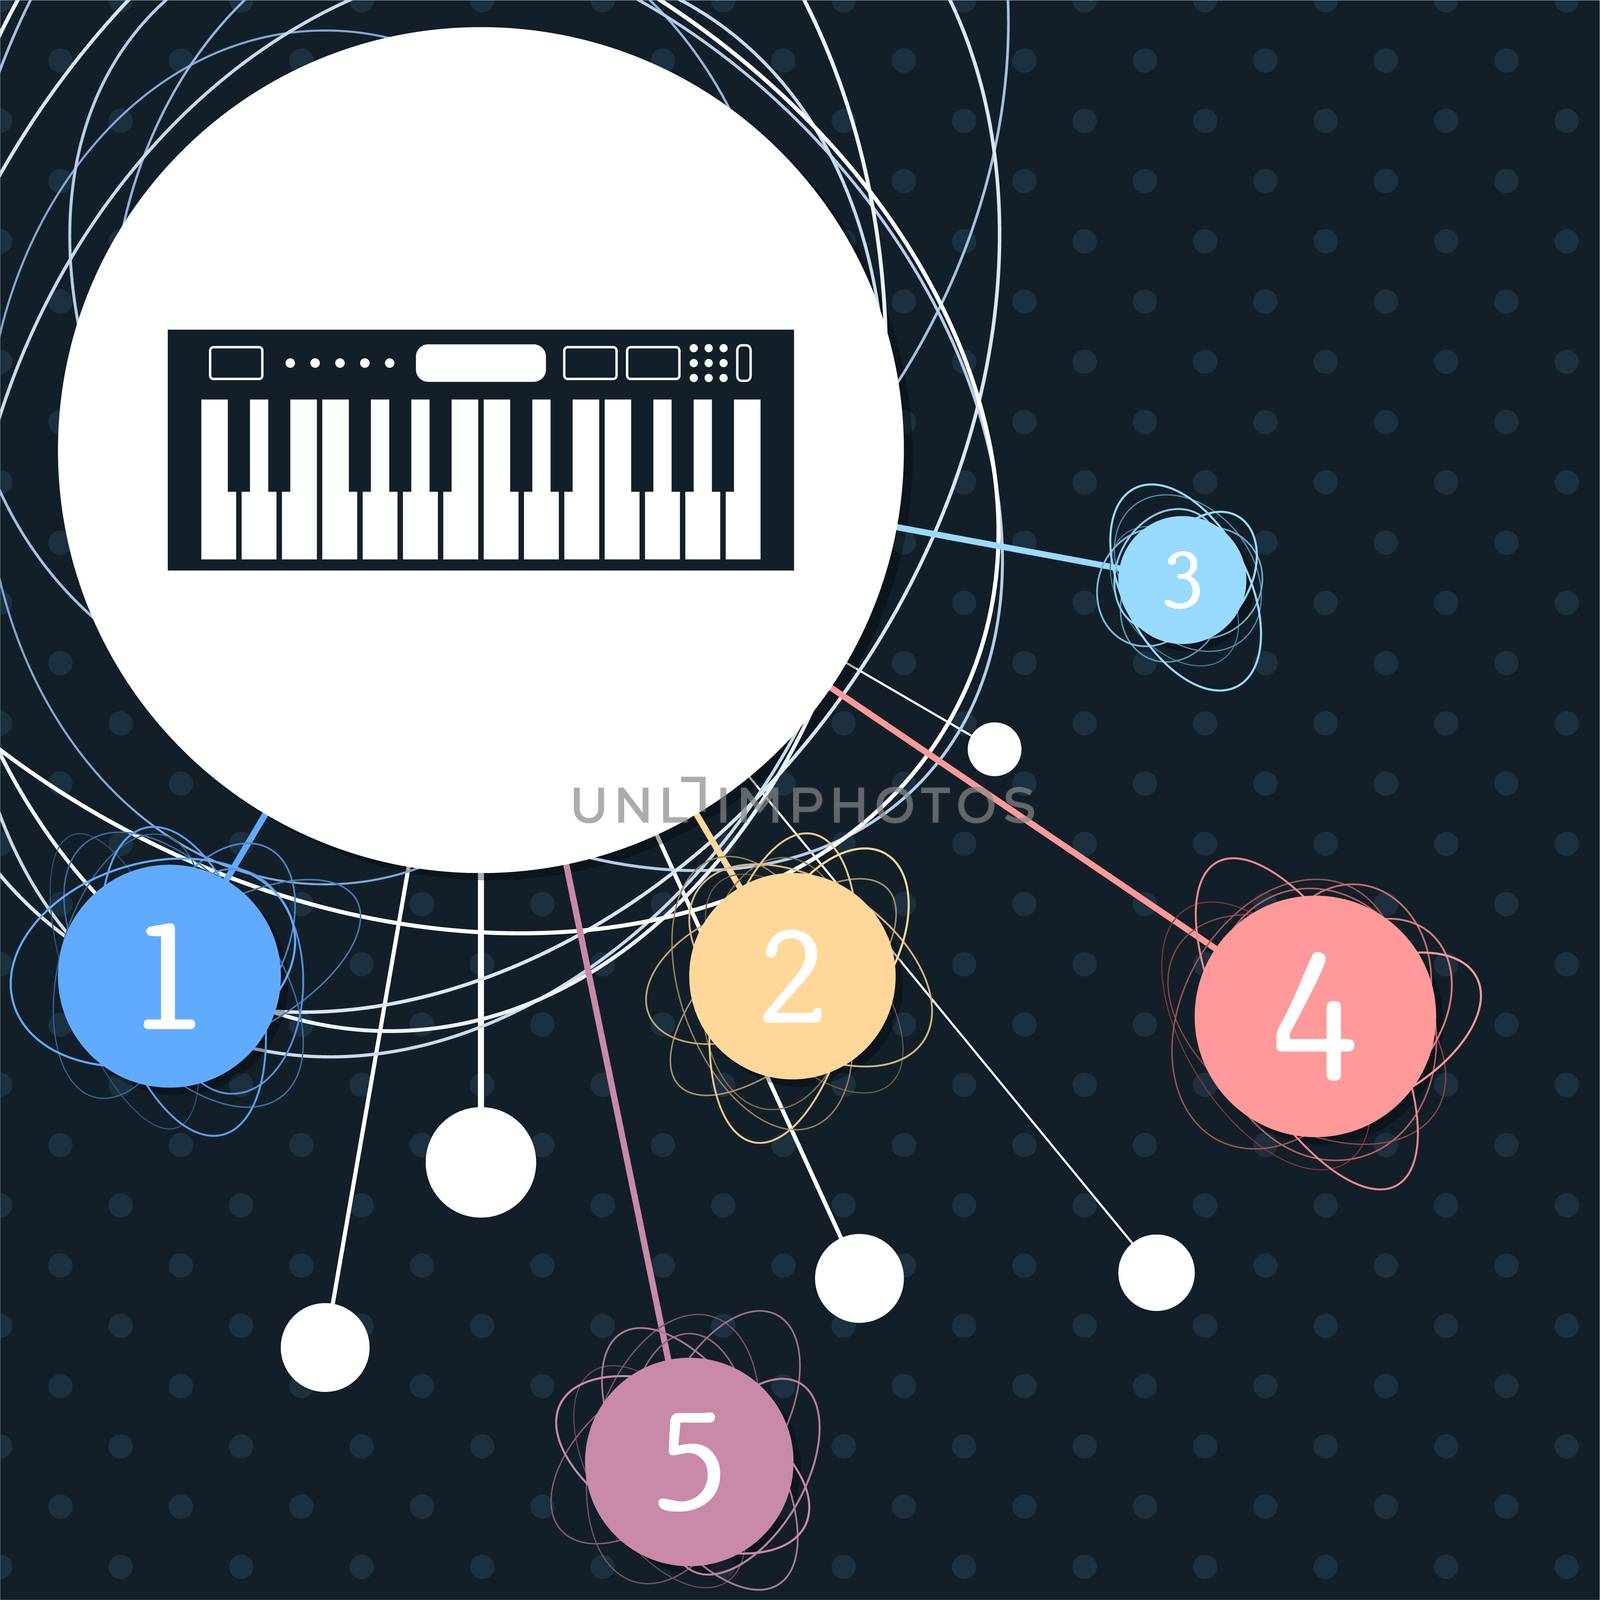 synthesizer icon with the background to the point and with infographic style.  by Adamchuk